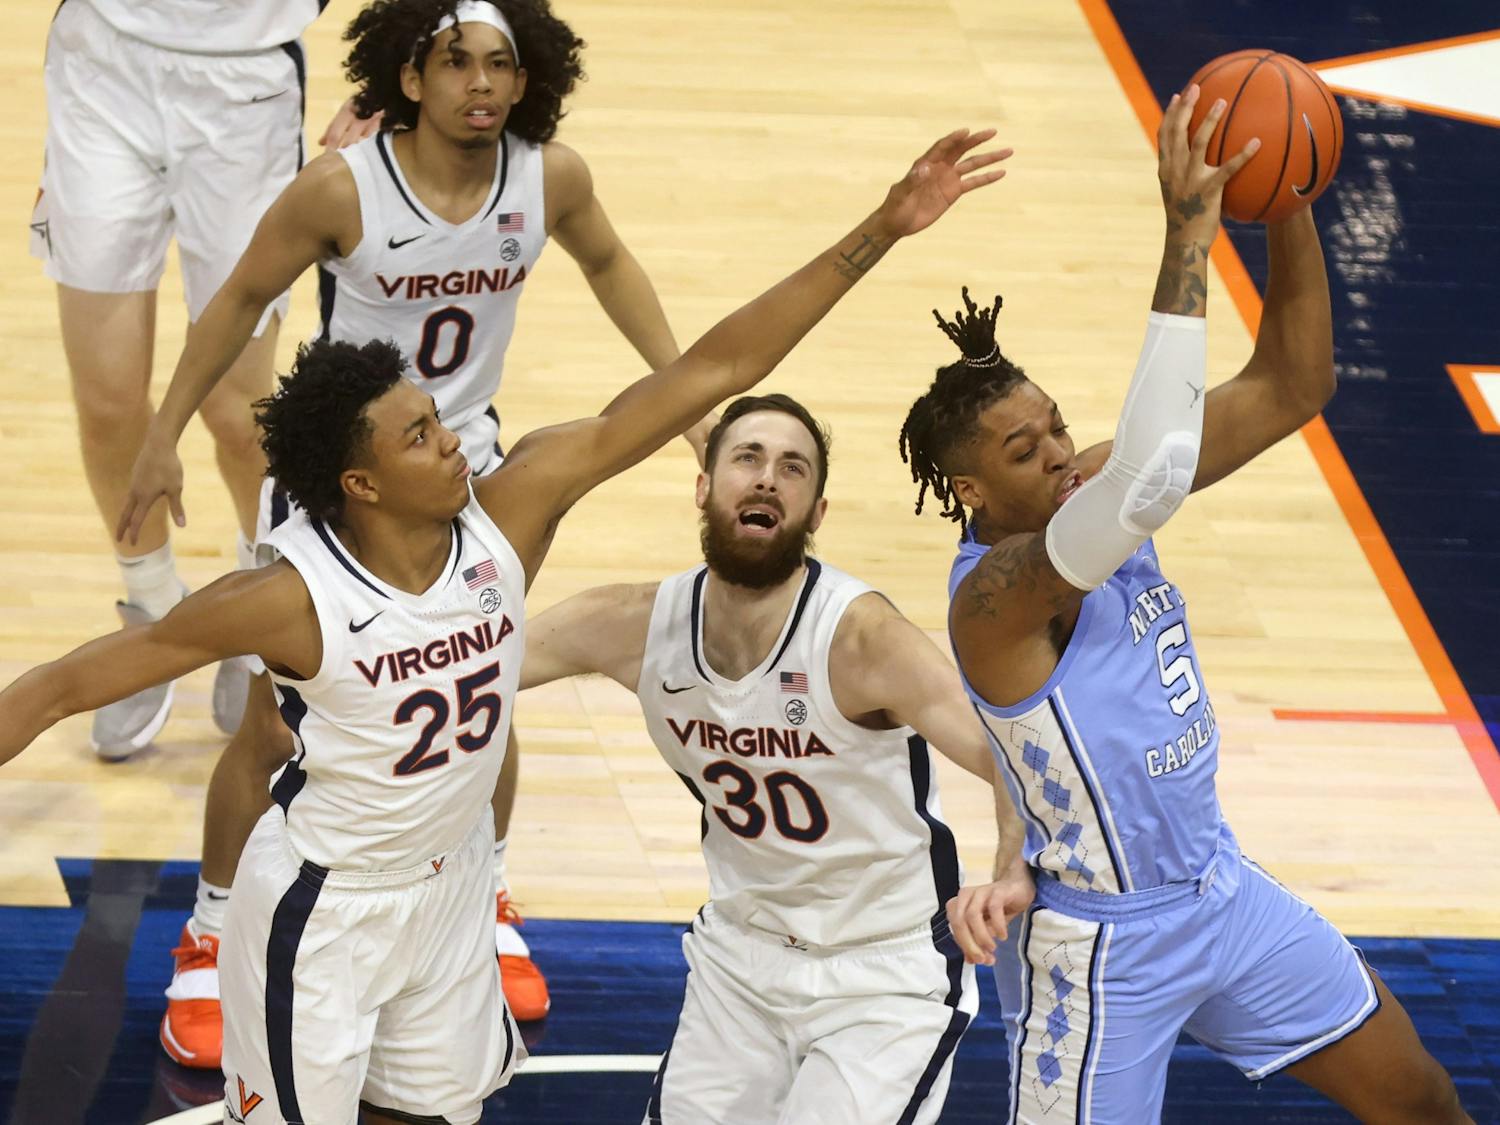 North Carolina forward Armando Bacot (5) grabs the rebound next to Virginia forward Jay Huff (30) and Virginia guard Trey Murphy III (25) during the game Saturday in Charlottesville. Photo courtesy of Andrew Shurtleff/The Daily Progress.